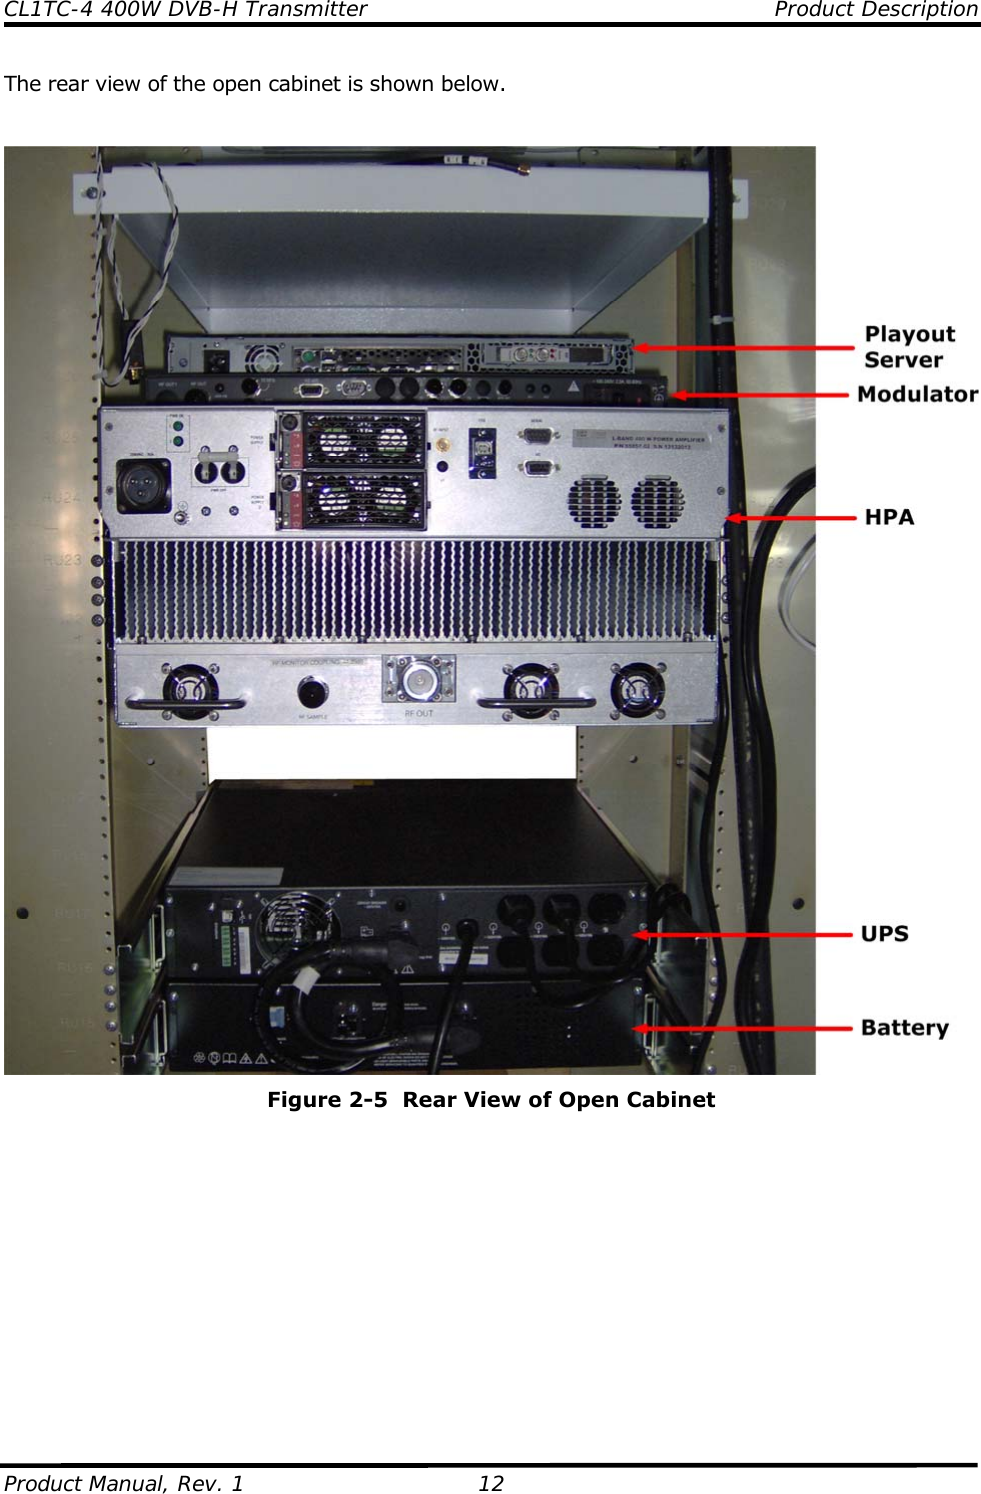 CL1TC-4 400W DVB-H Transmitter    Product Description  Product Manual, Rev. 1  12 The rear view of the open cabinet is shown below.    Figure 2-5  Rear View of Open Cabinet             